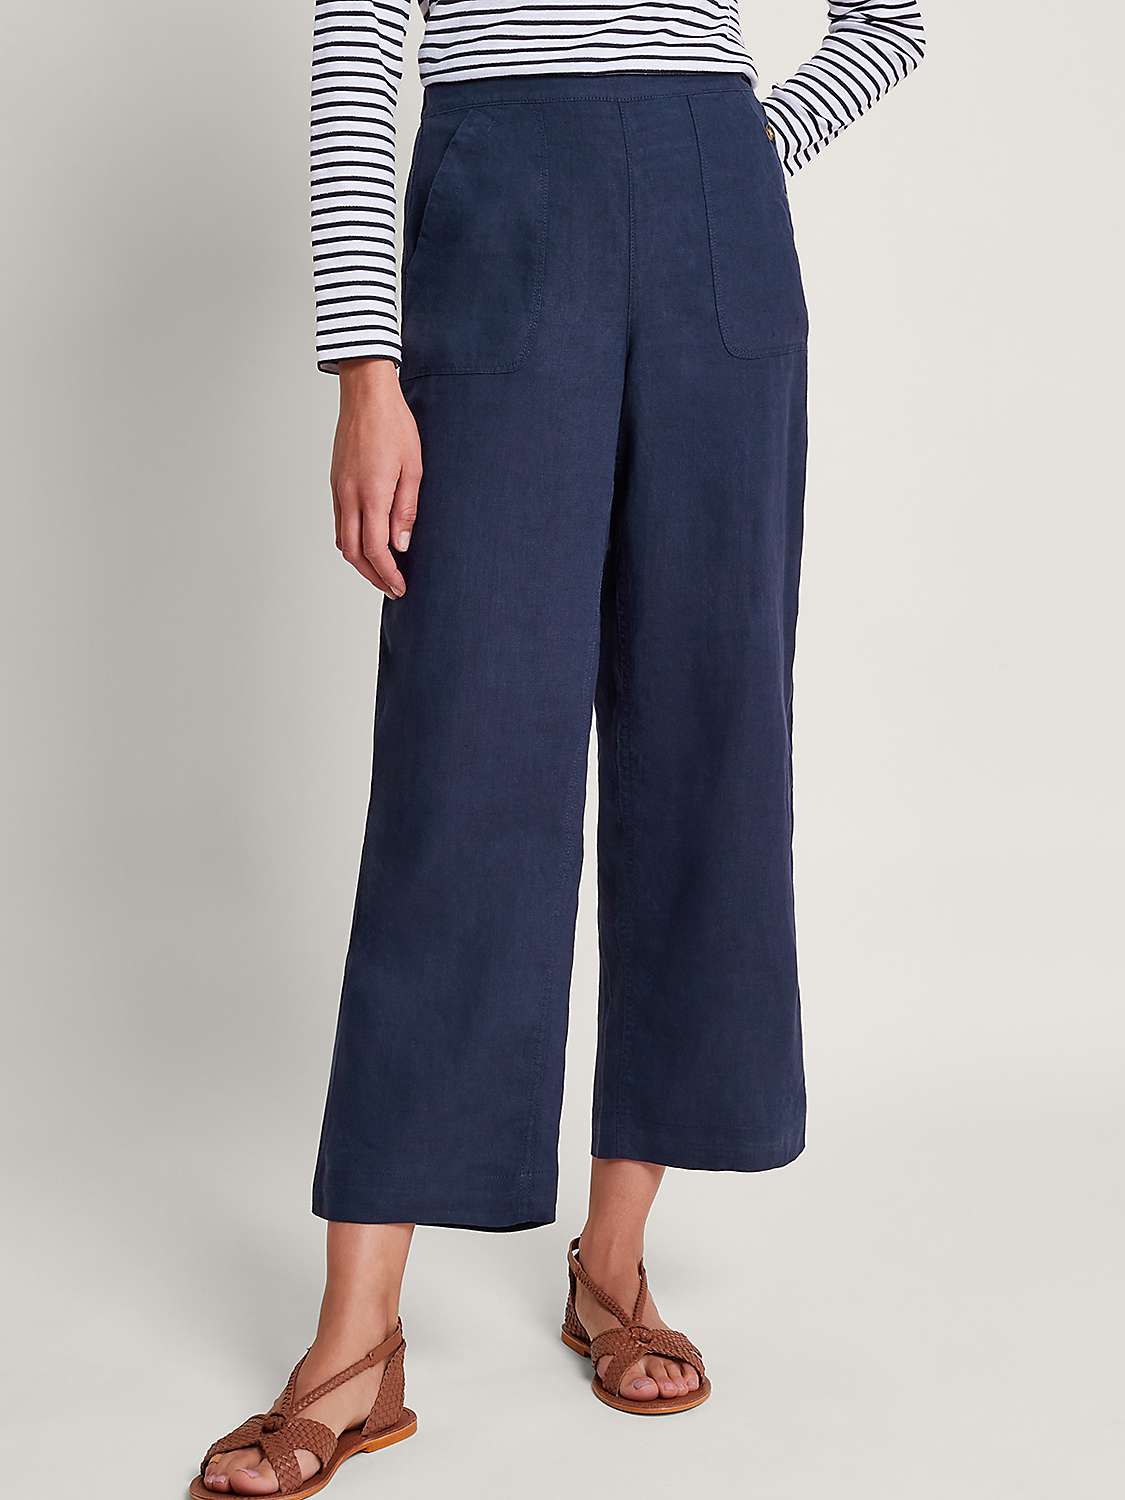 Buy Monsoon Parker Linen Short Cropped Trousers, Navy Online at johnlewis.com